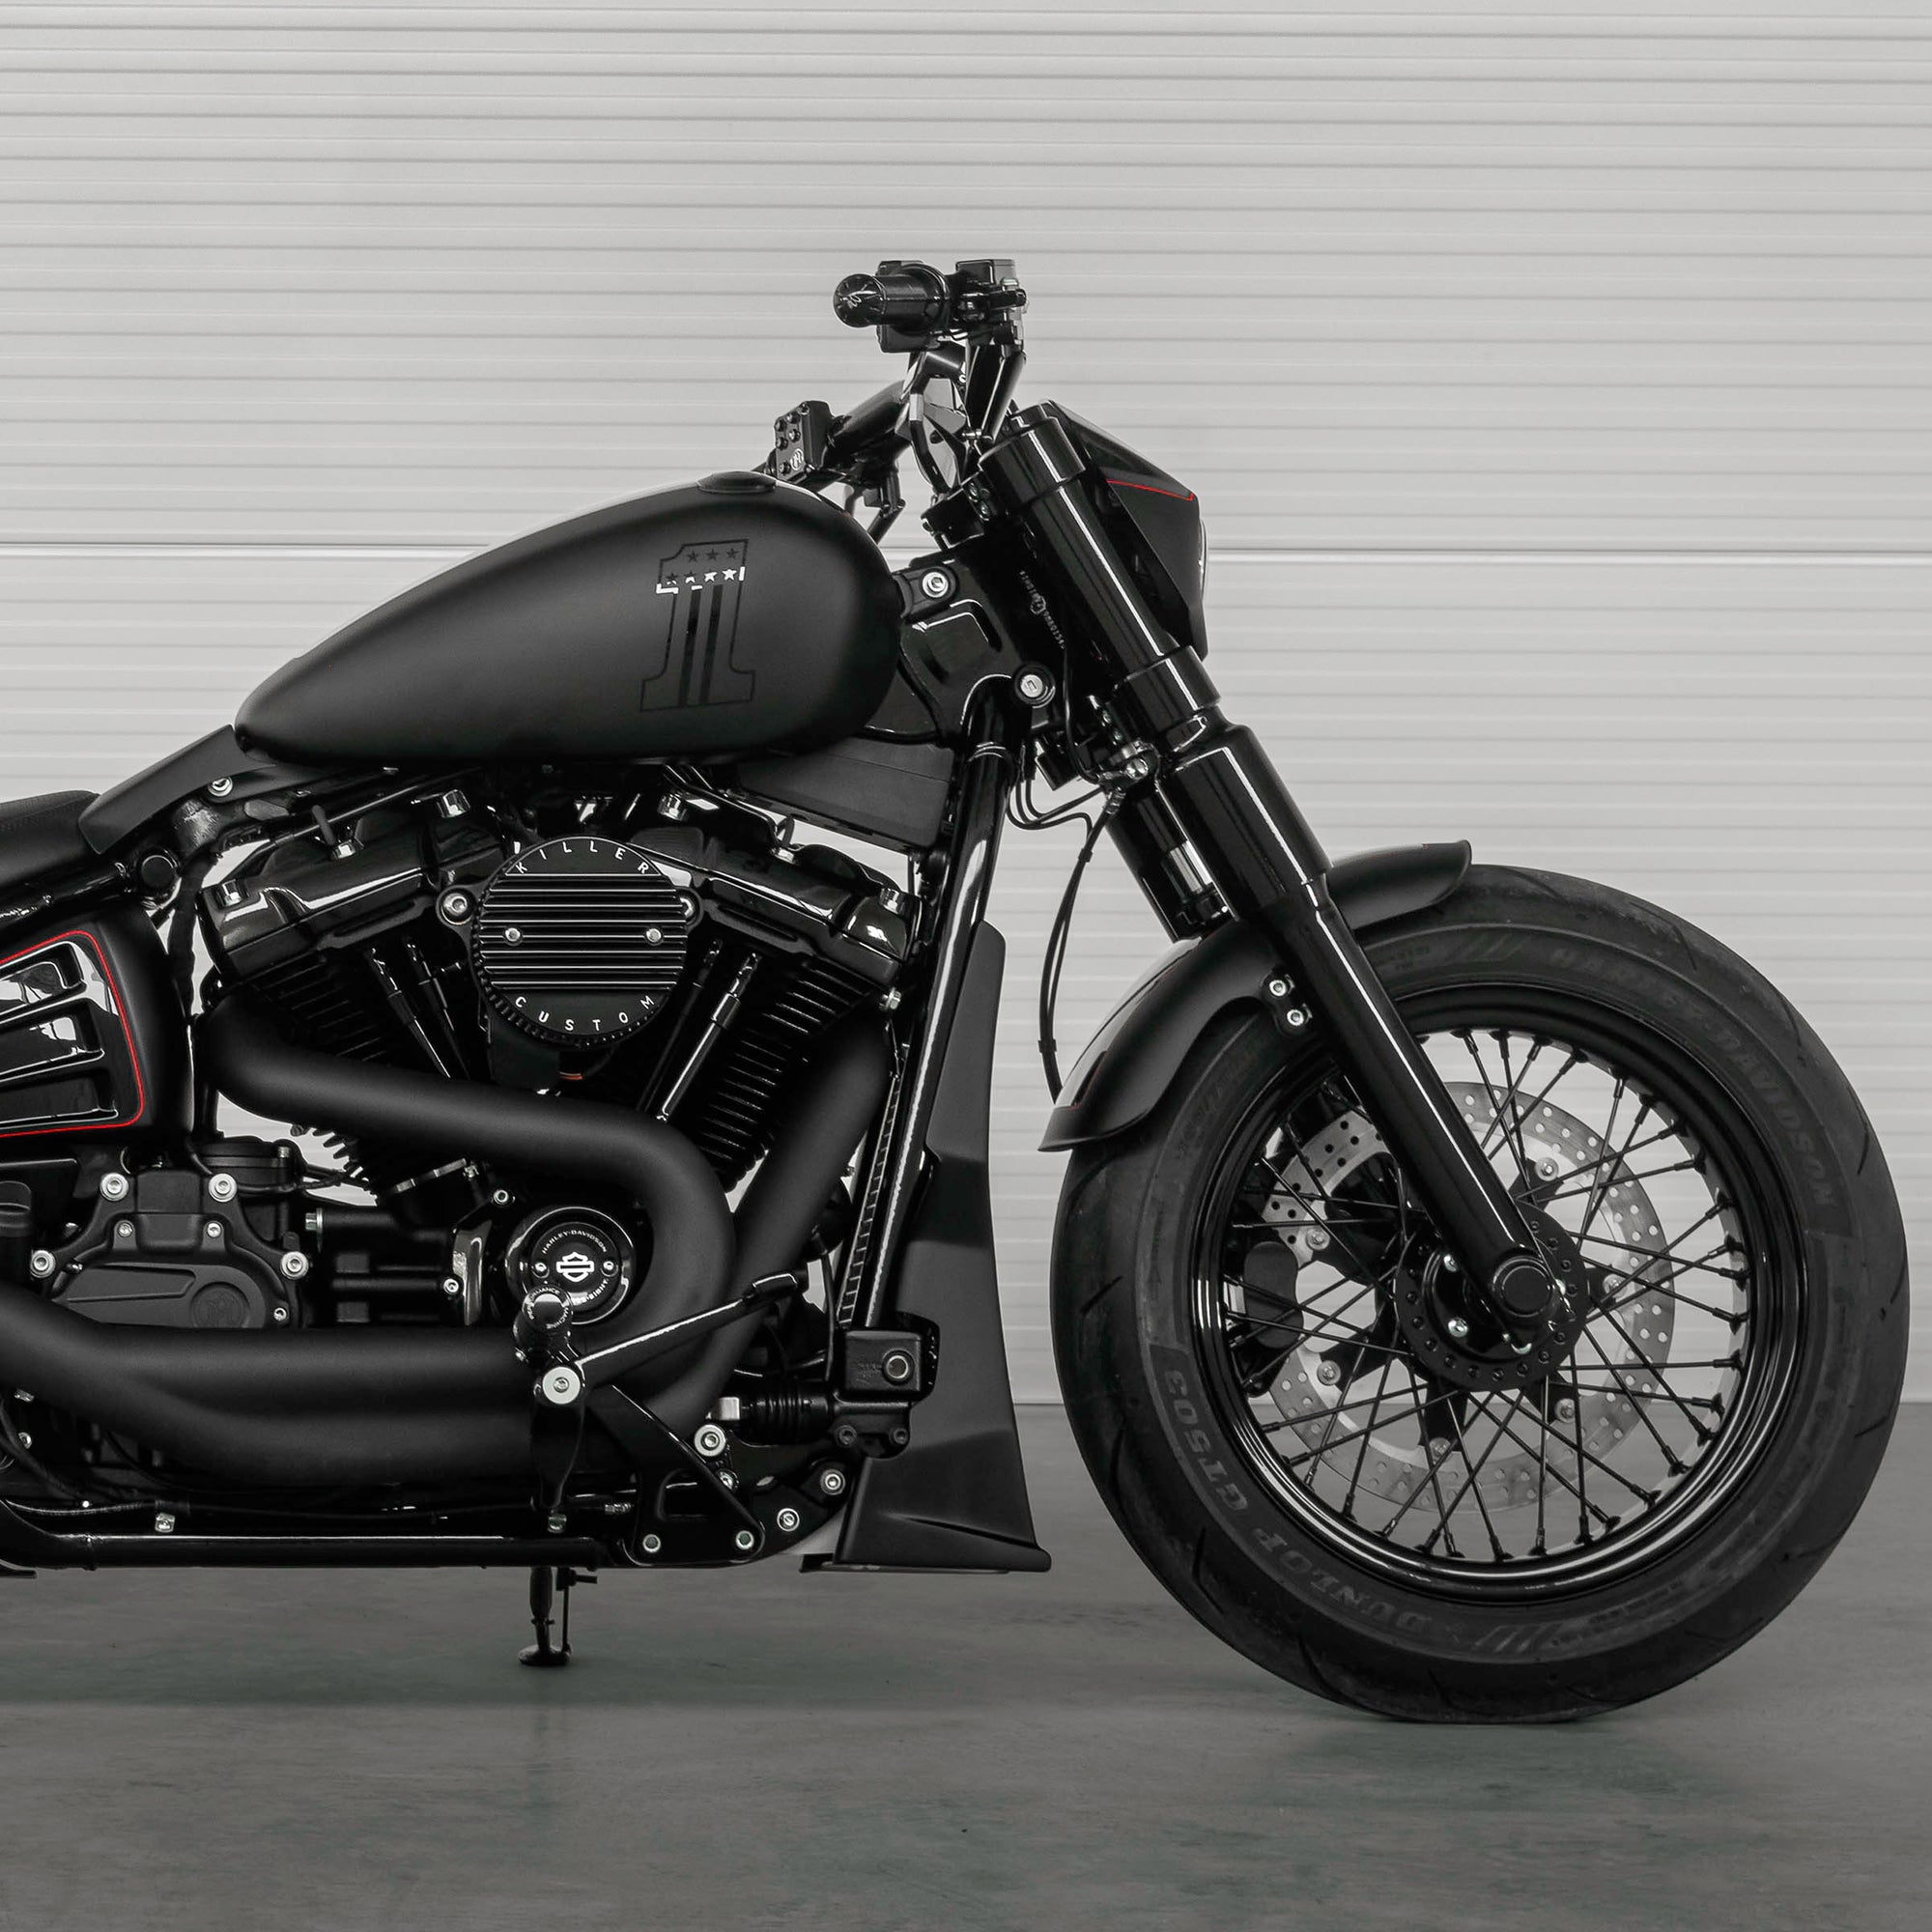 Zoomed Harley Davidson motorcycle with Killer Custom parts from the side with a white garage wall in the background